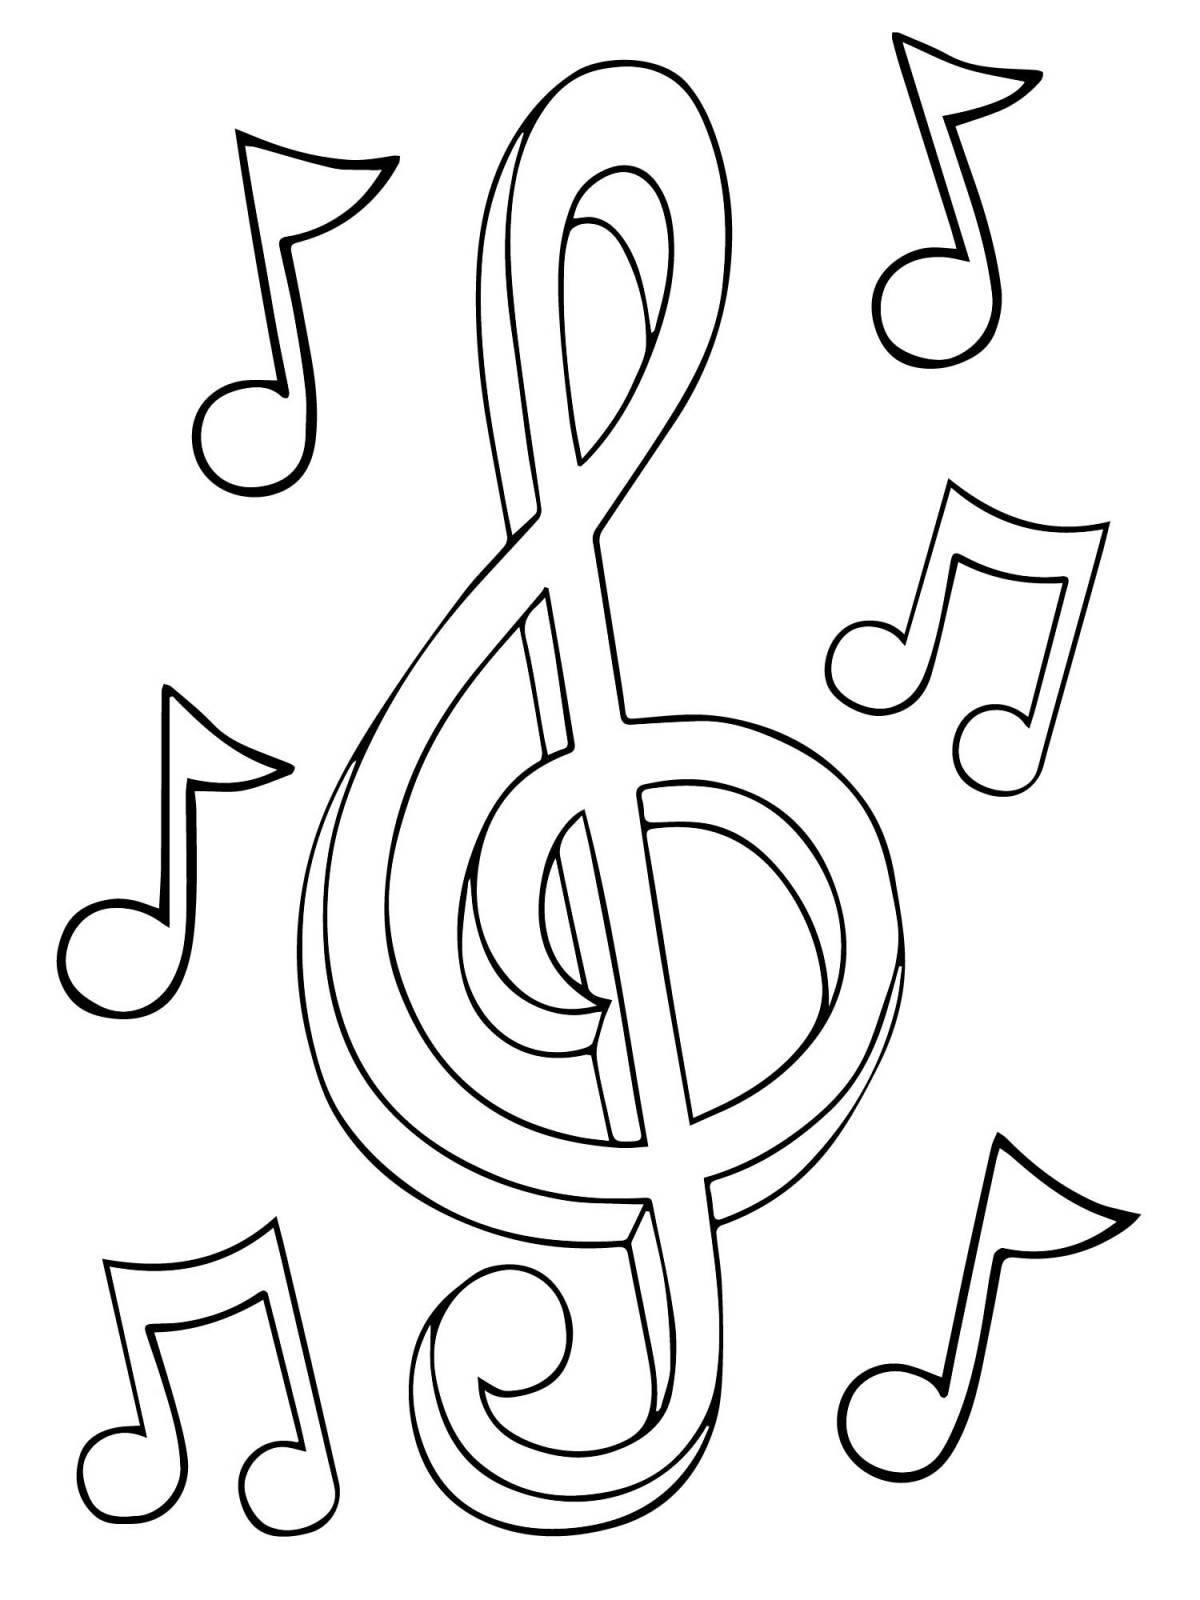 Radiant coloring page treble clef